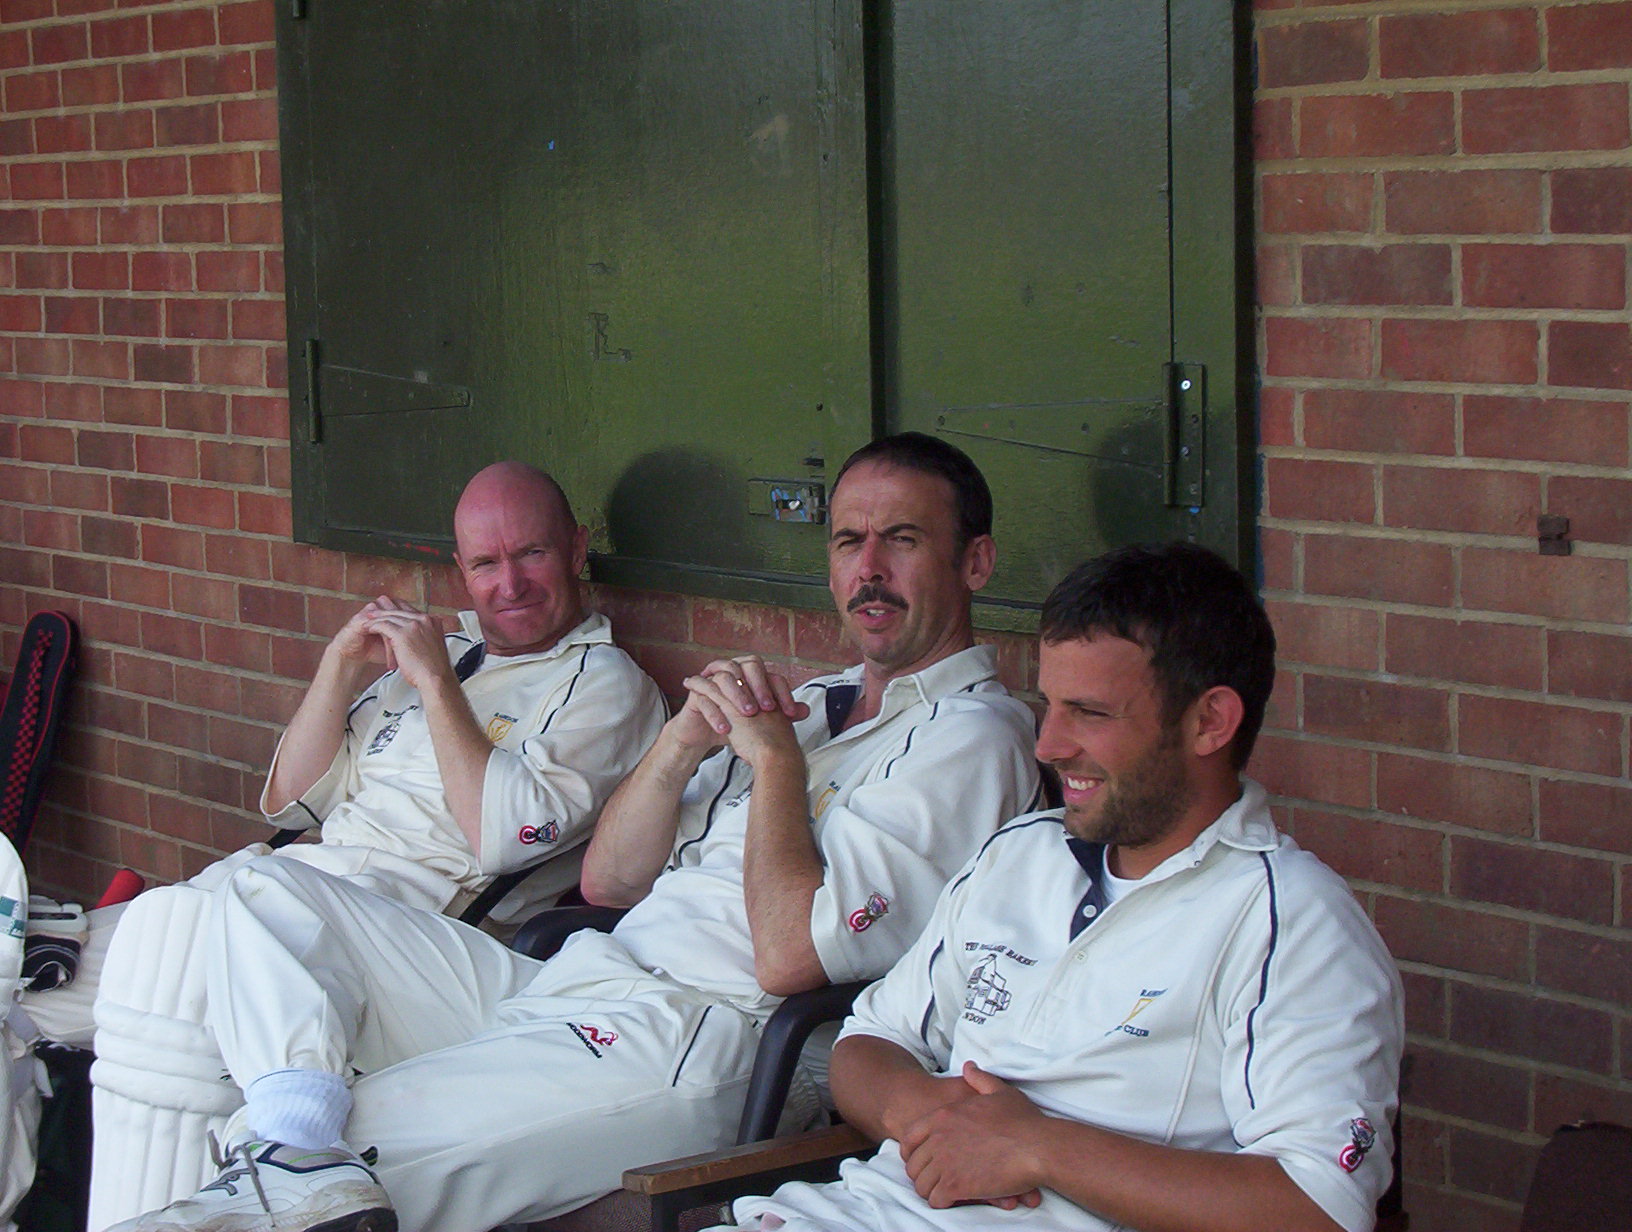 Phil (centre) looks relaxed on debut